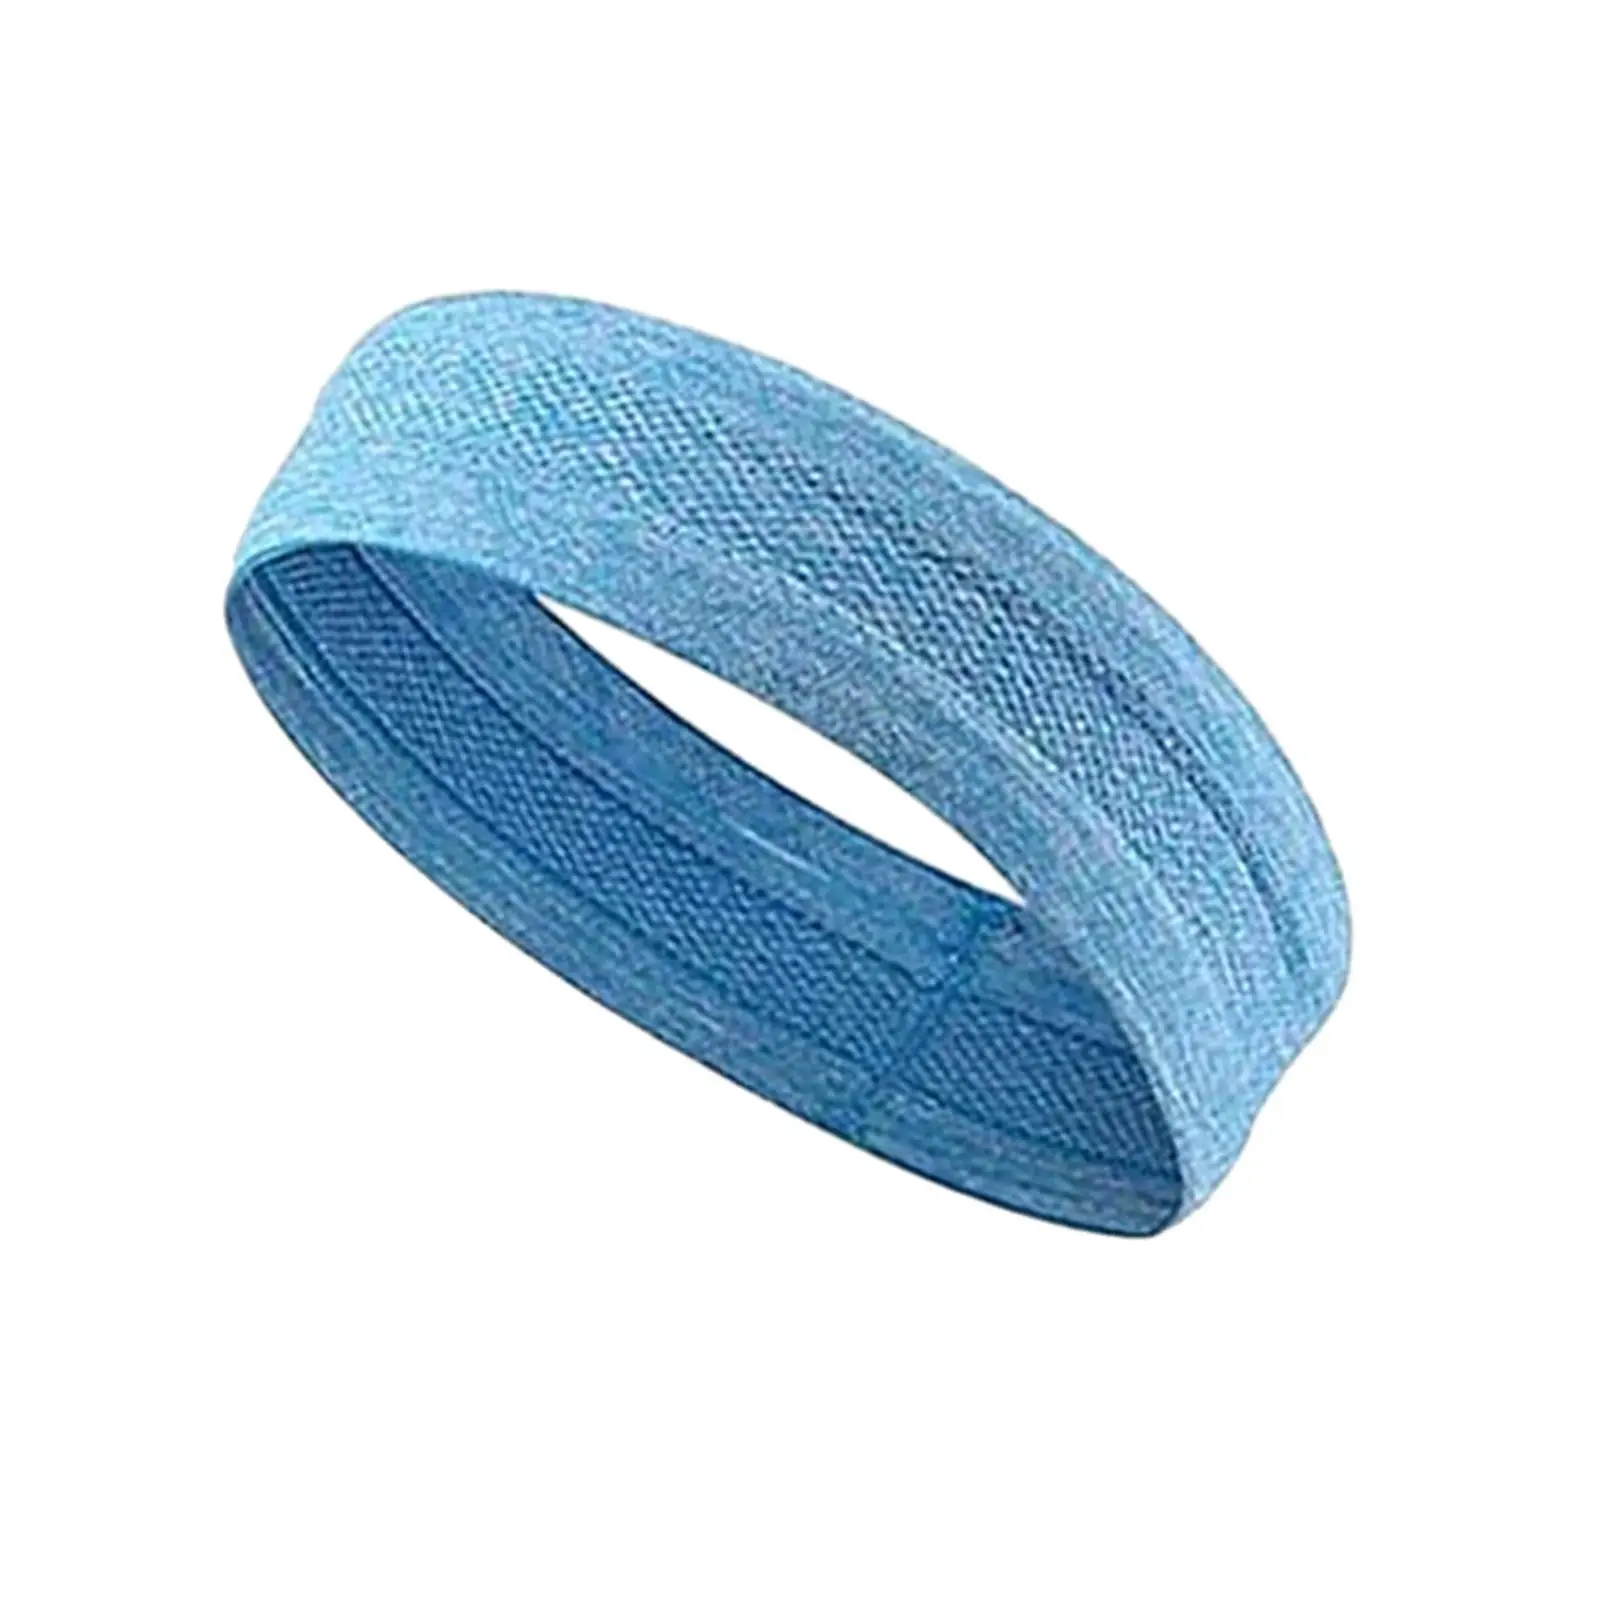 Sweatband Stretchy Hair Band Sweat Absorbent Sports Headbands Workout Headbands for Mountaineering Gym Tennis Pilates Cycling